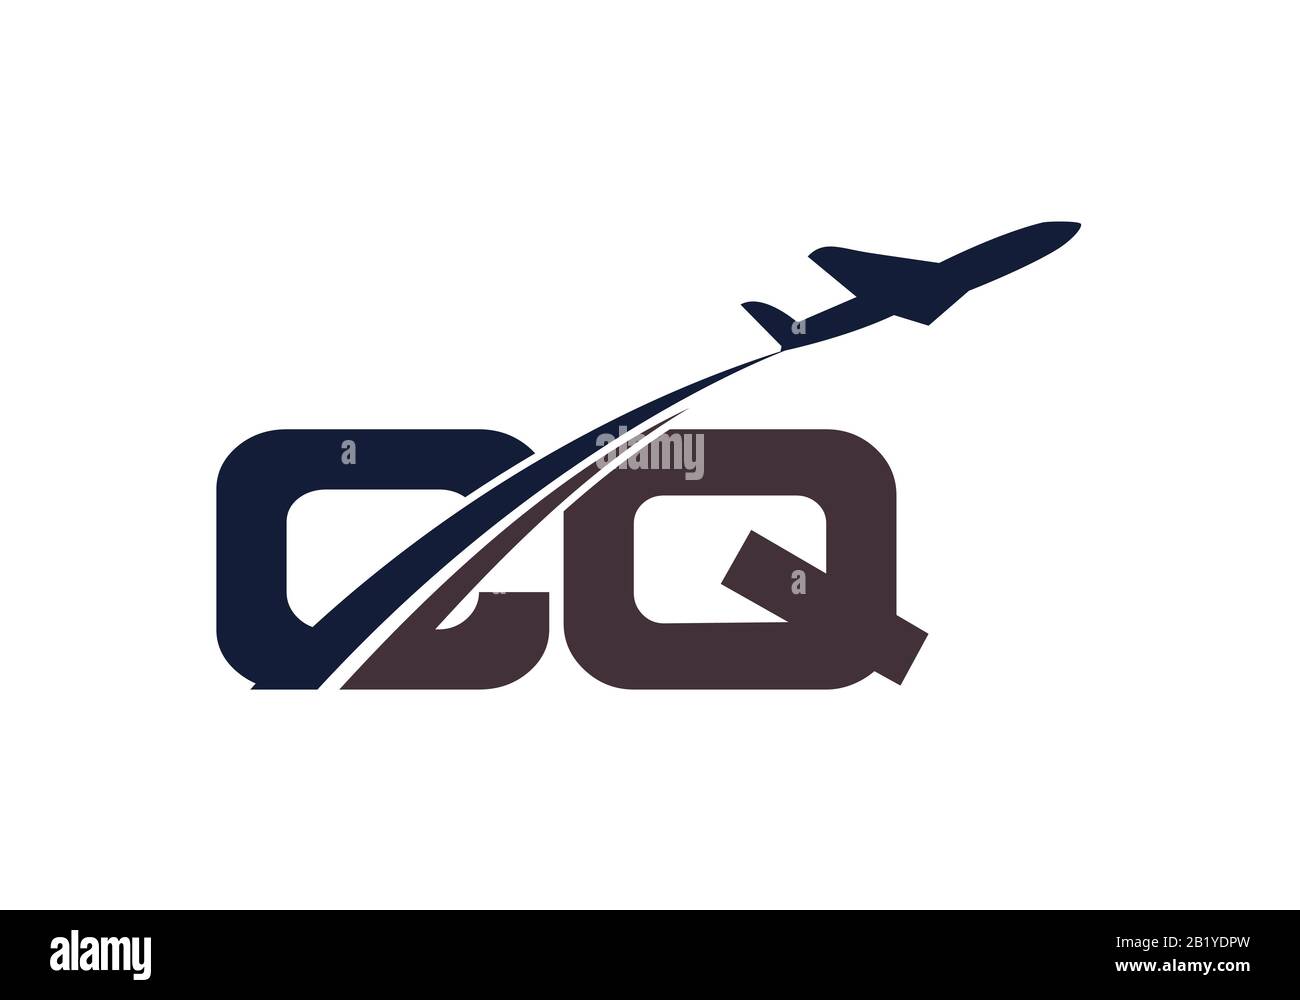 Initial Letter C and Q  with Aviation Logo Design, Air, Airline, Airplane and Travel Logo template. Stock Vector